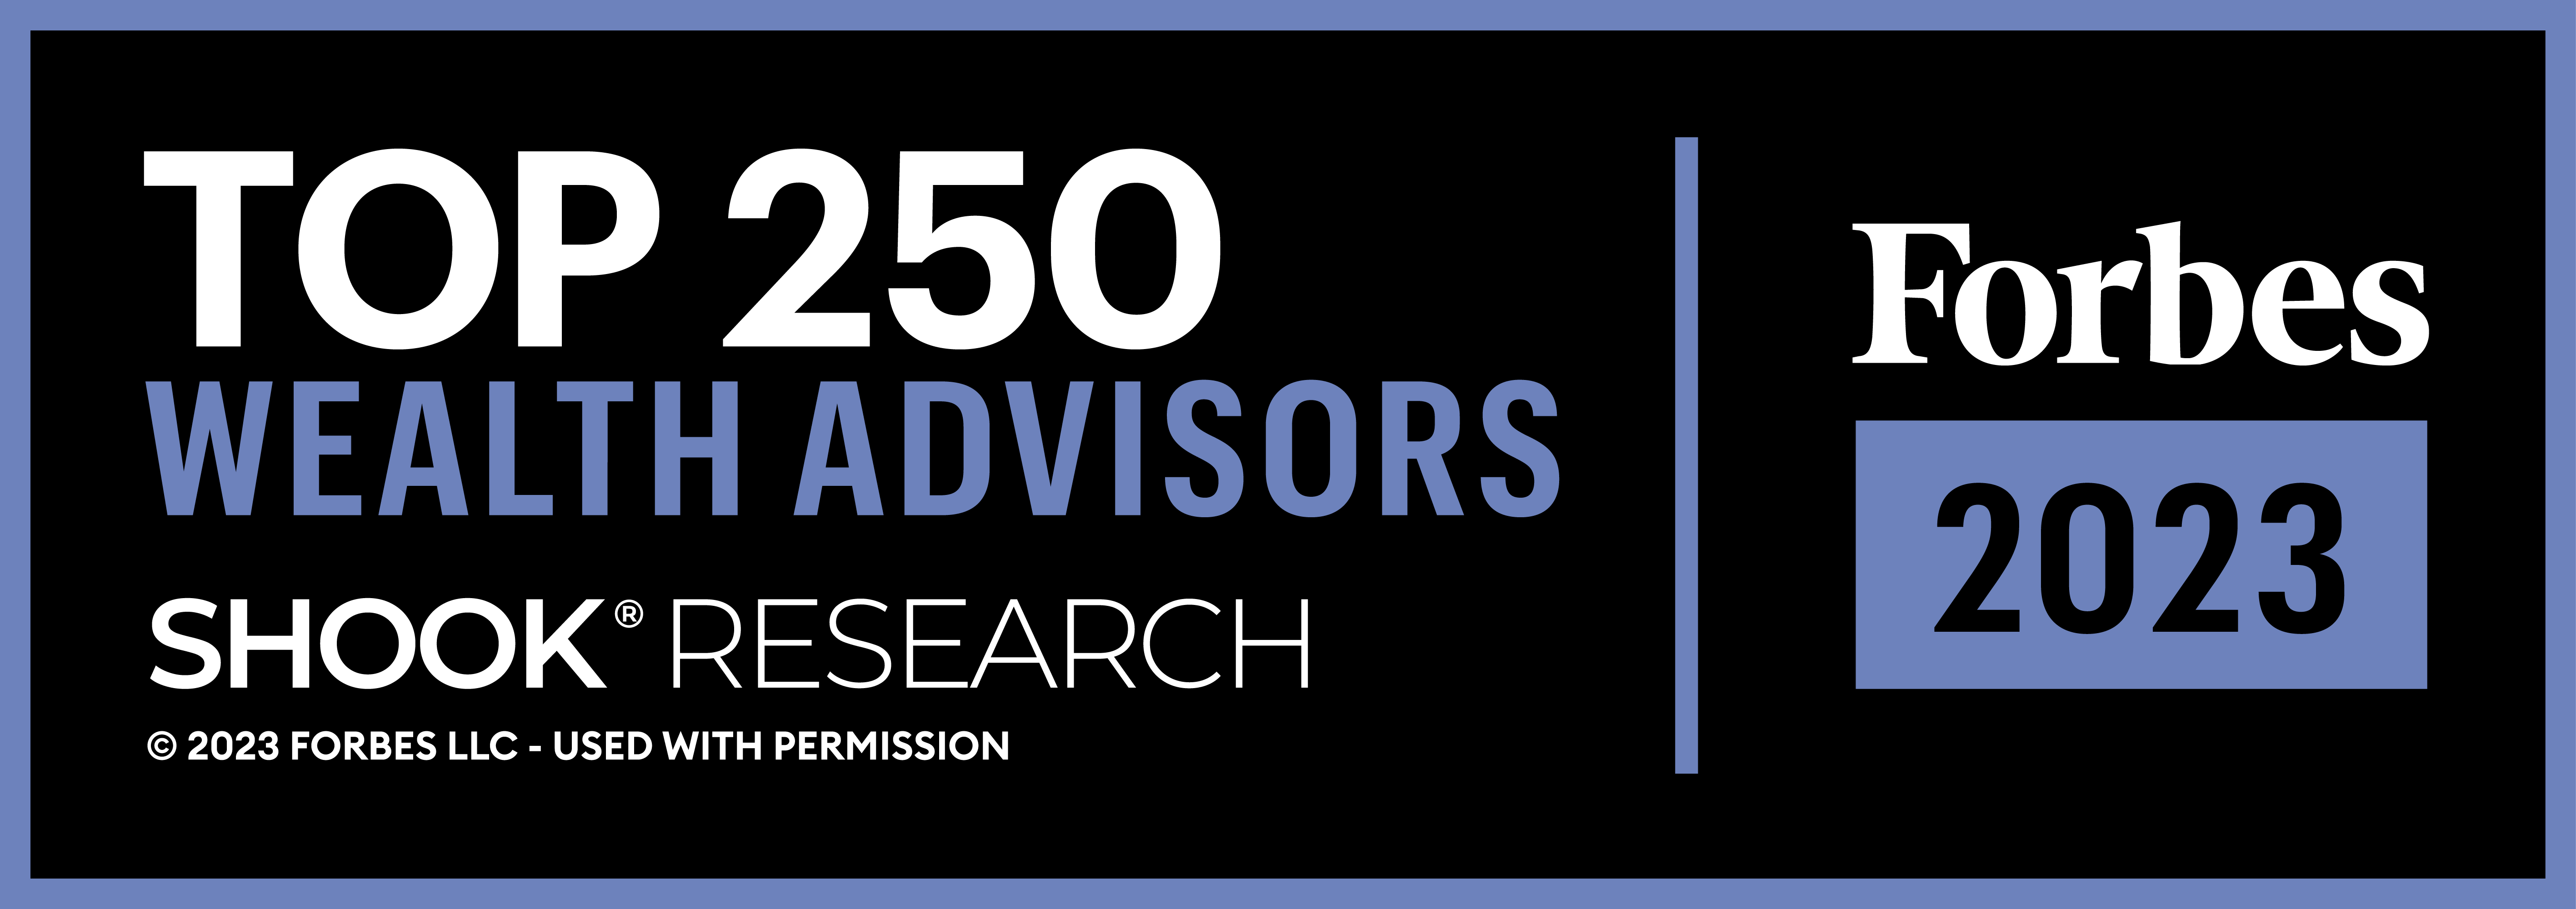 Randy Carver named to America's Top 250 Wealth Advisors in 2023 by Forbes